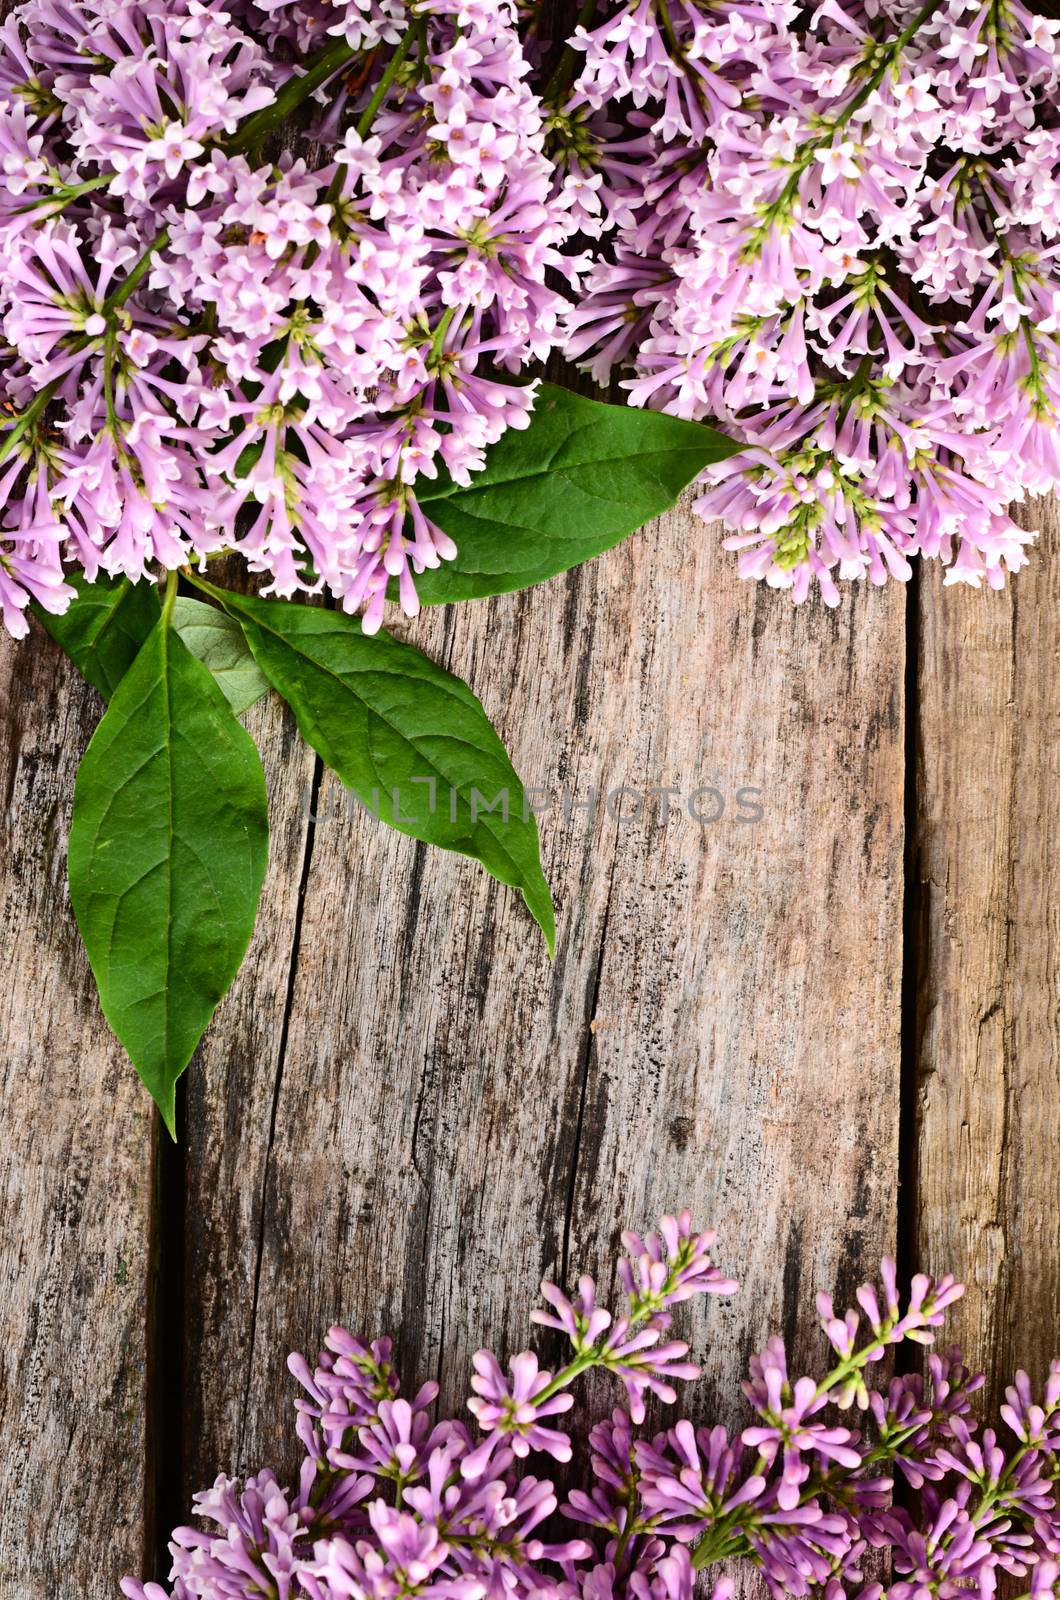 The flower pink lilac a wooden background